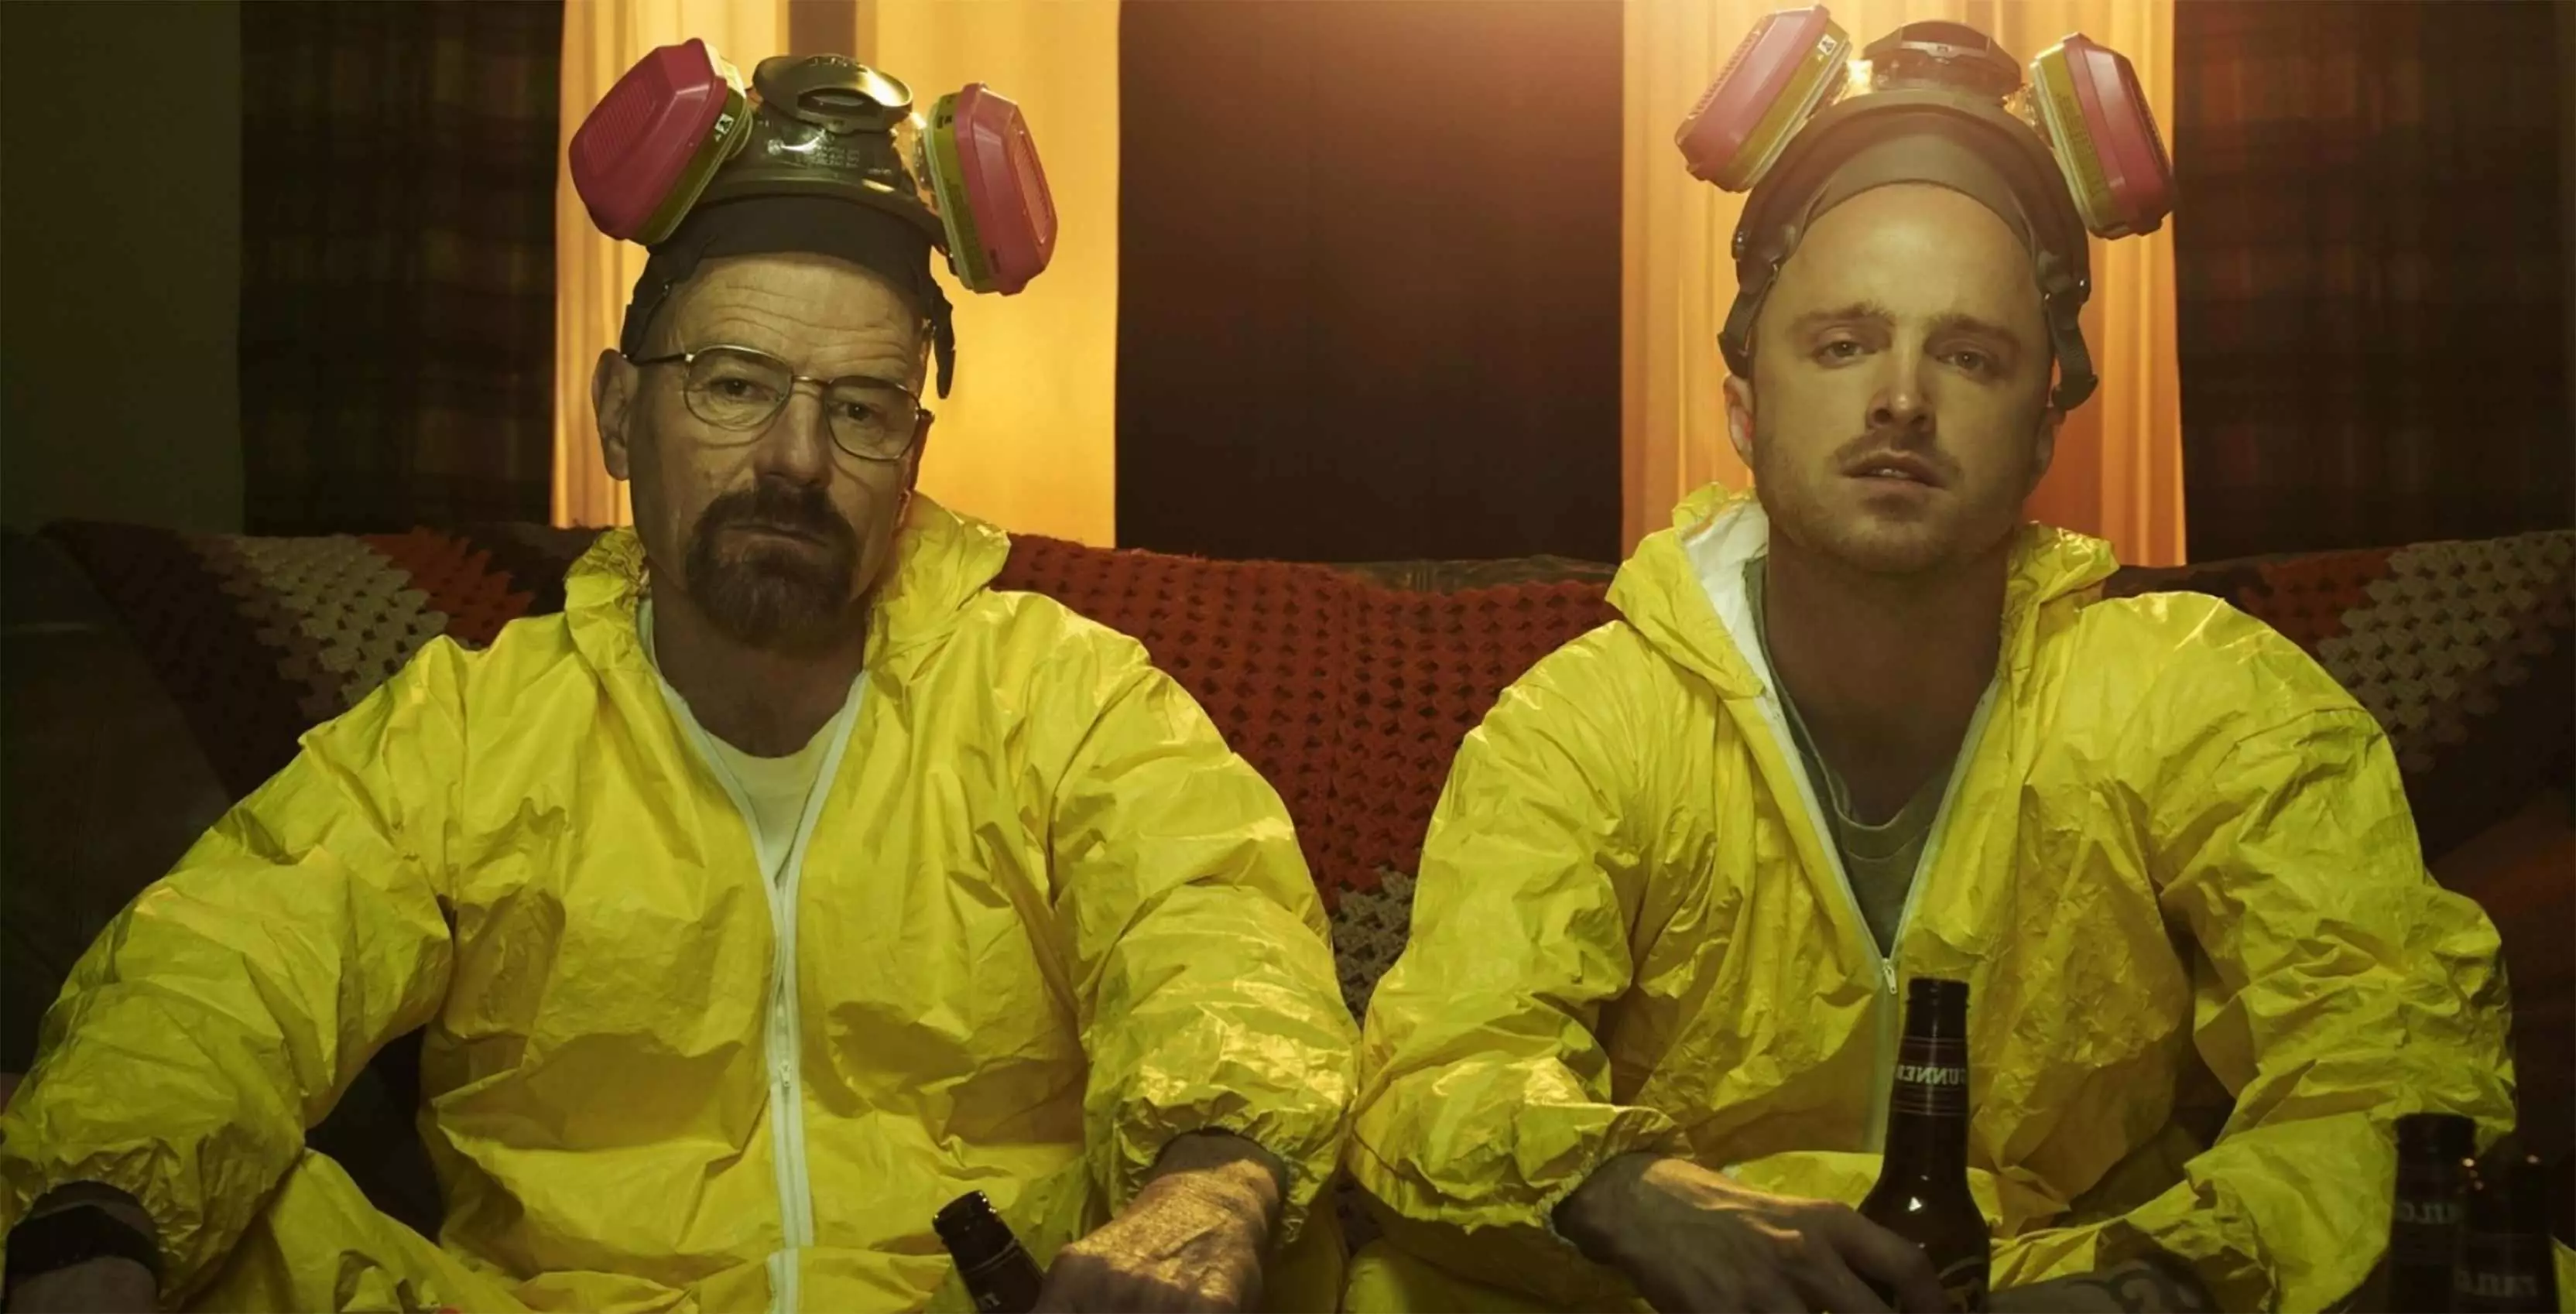 You'll need to whip up a concoction that Walter and Jesse would be proud of (